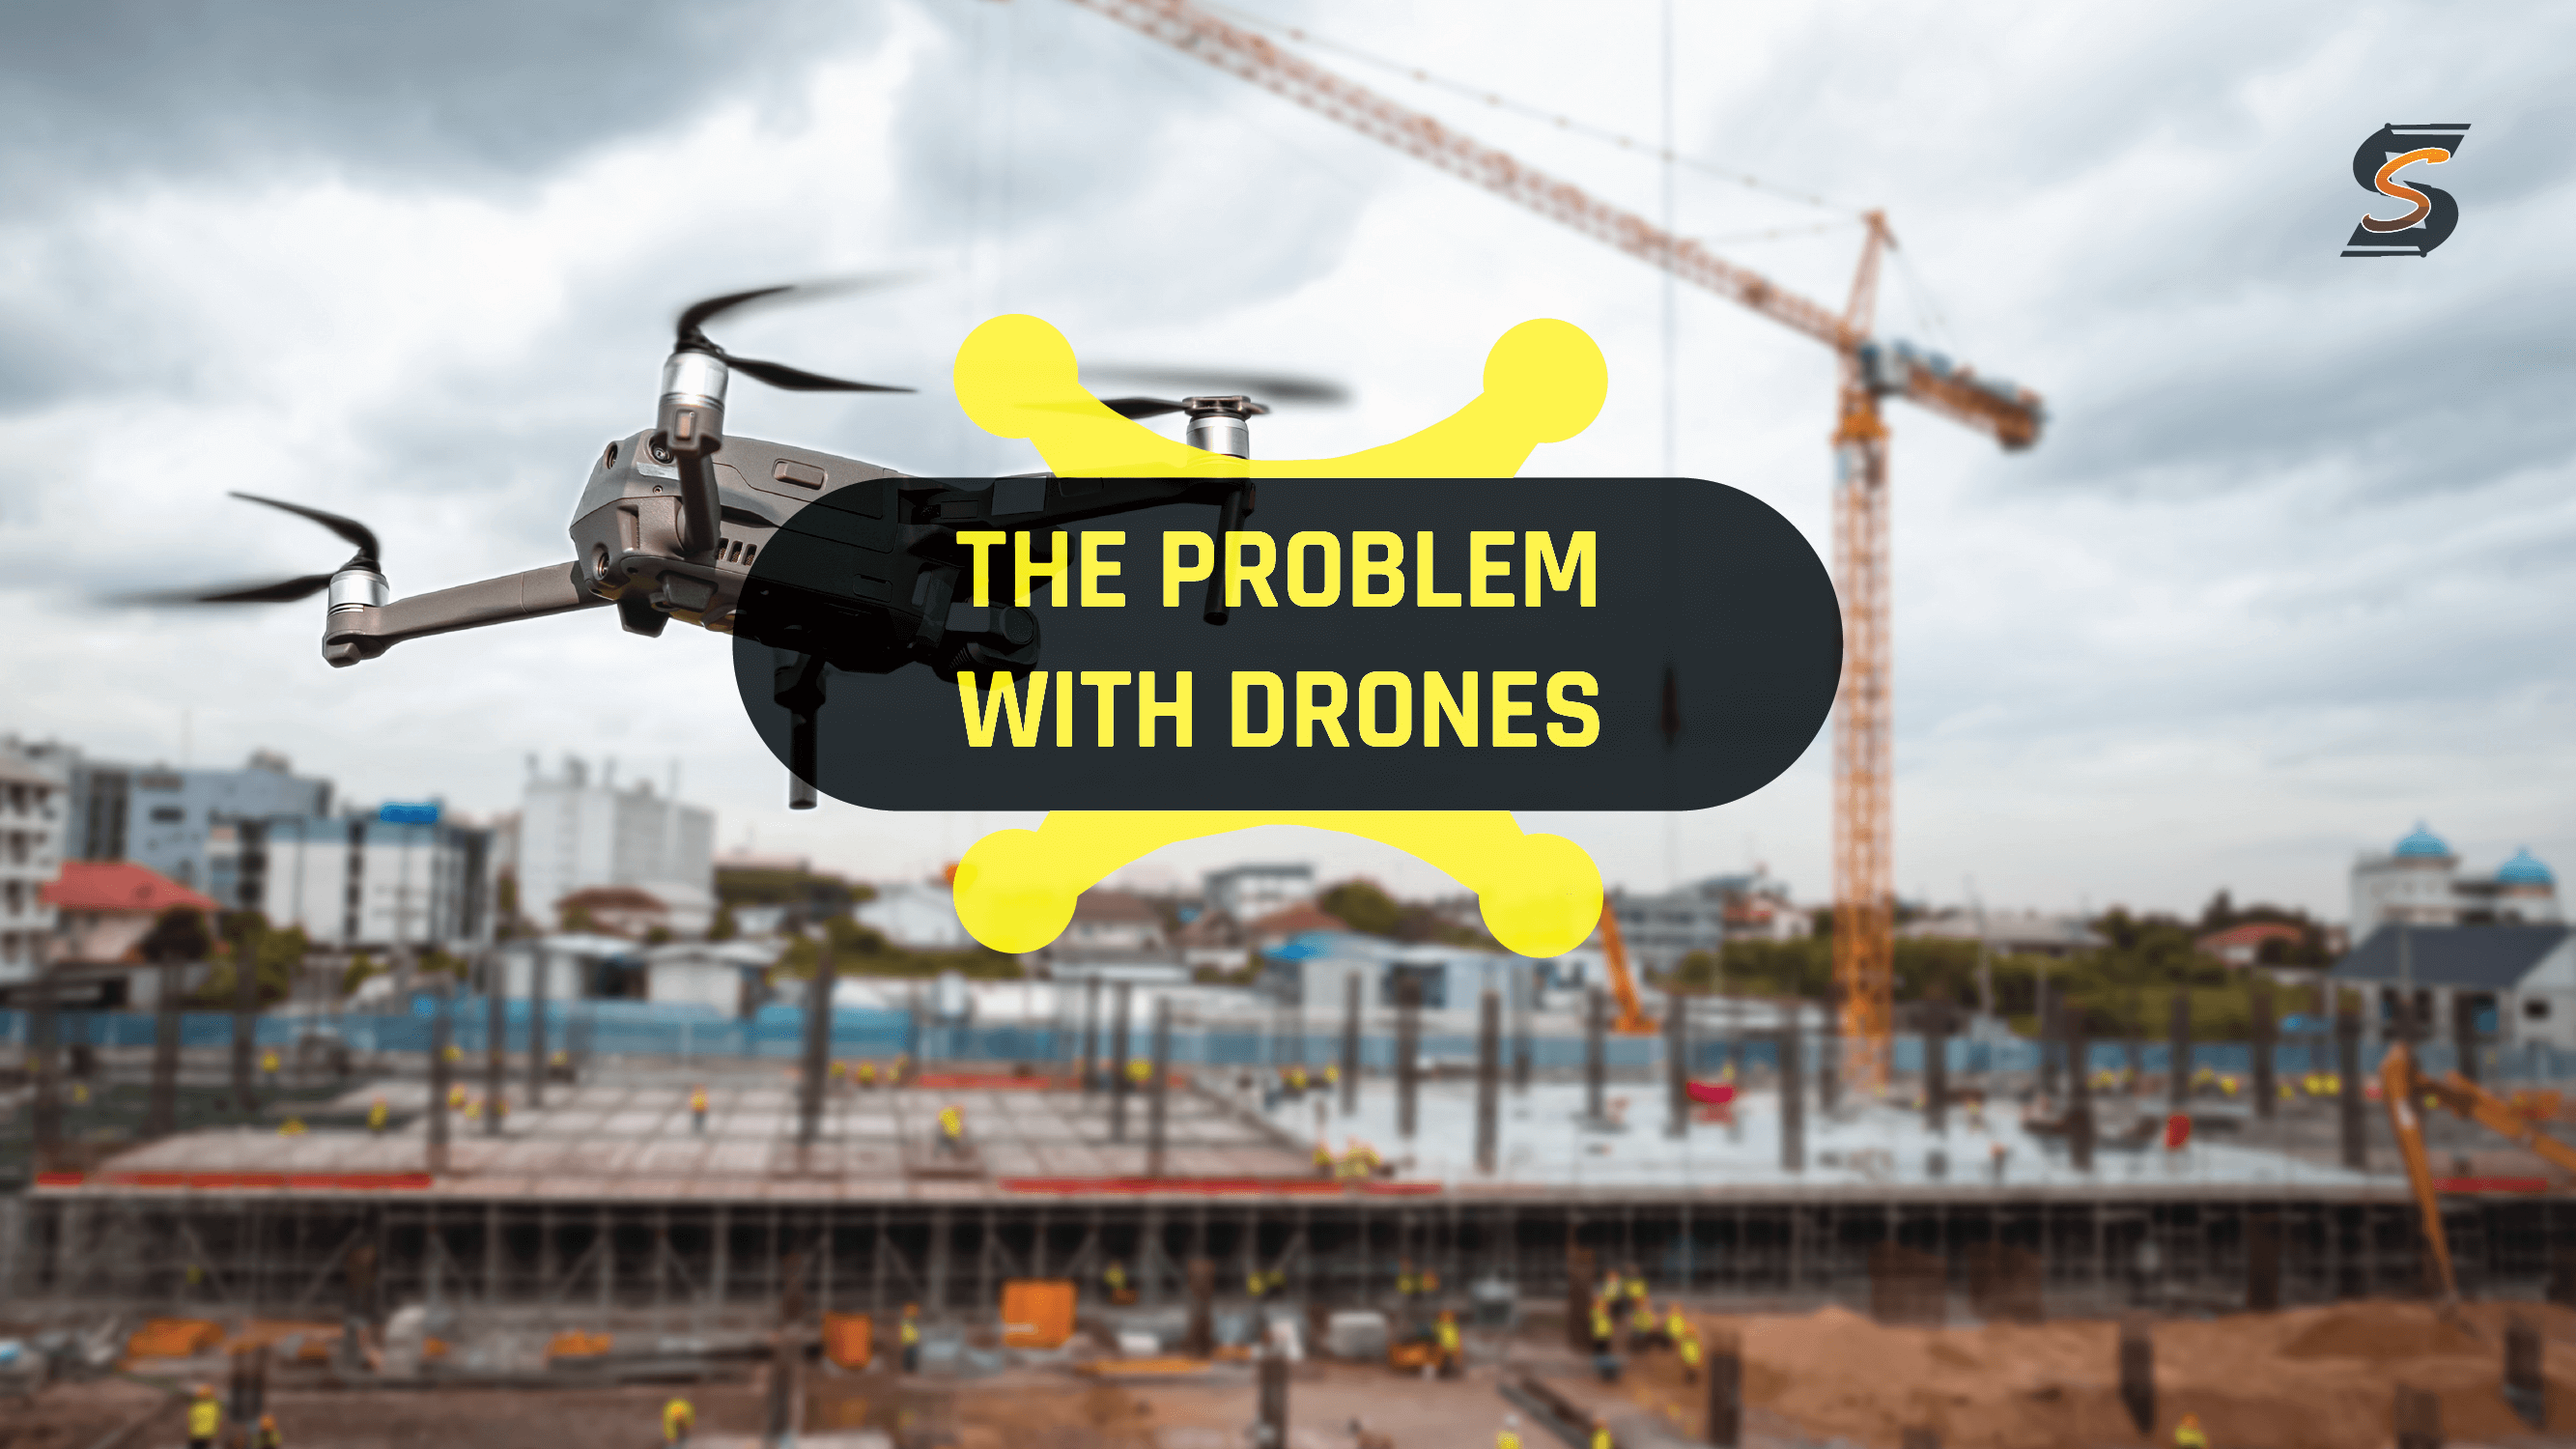 Featured image for “THE PROBLEM WITH DRONES”